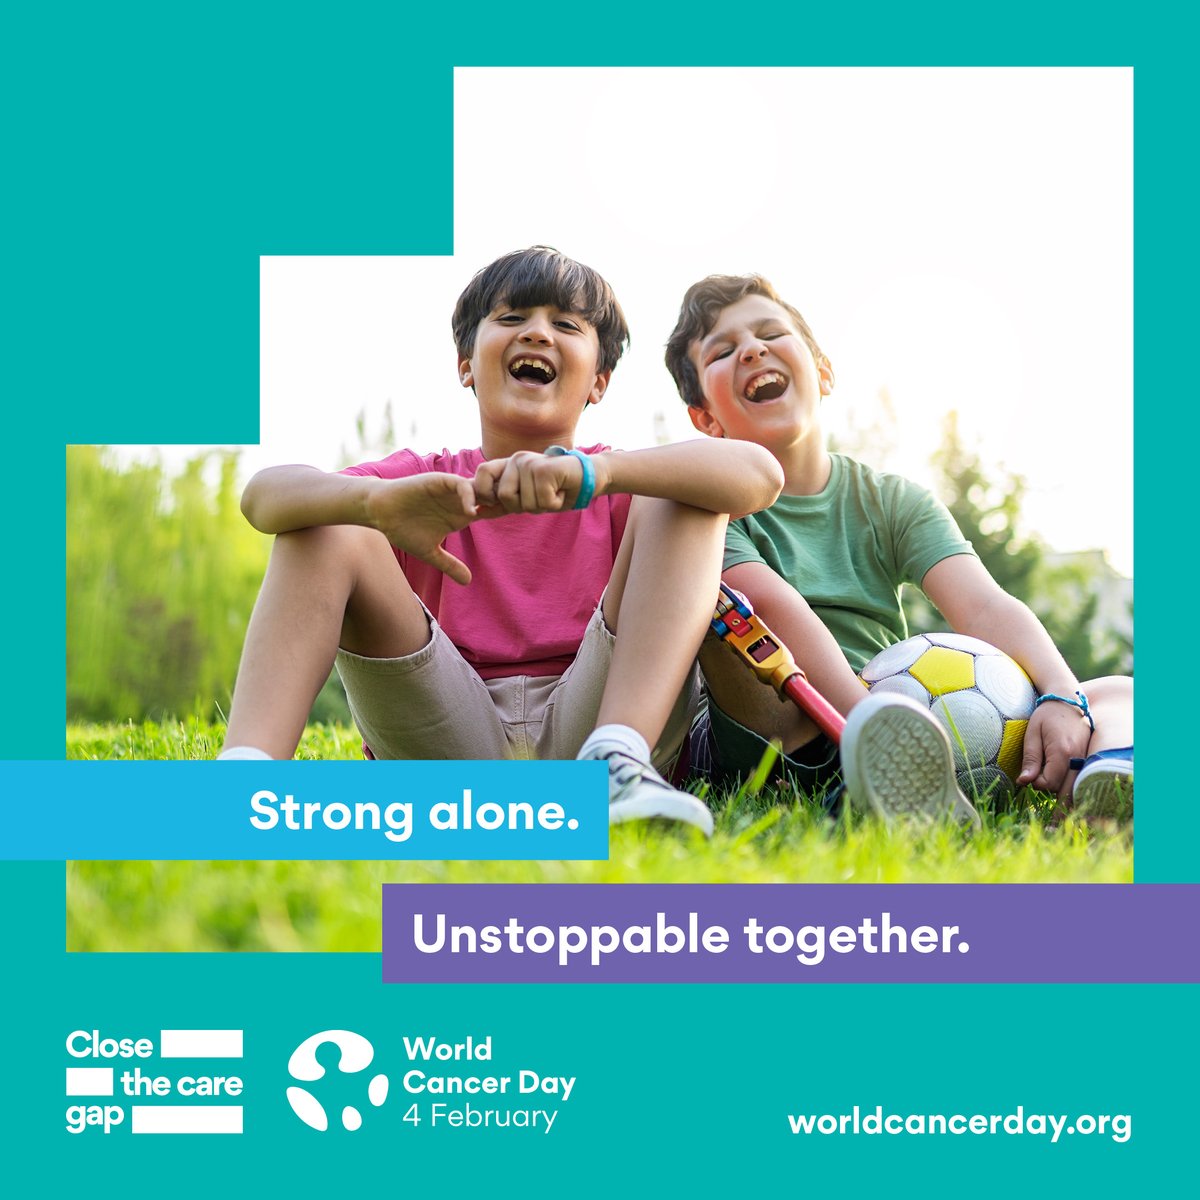 Today, on #WorldCancerDay, we raise awareness about the urgent need to #CloseTheCareGap. Children wait 6.5 years longer than adults for #cancer treatment. We are committed to putting children at the forefront of everything we do. Learn more: bit.ly/3SIdt14